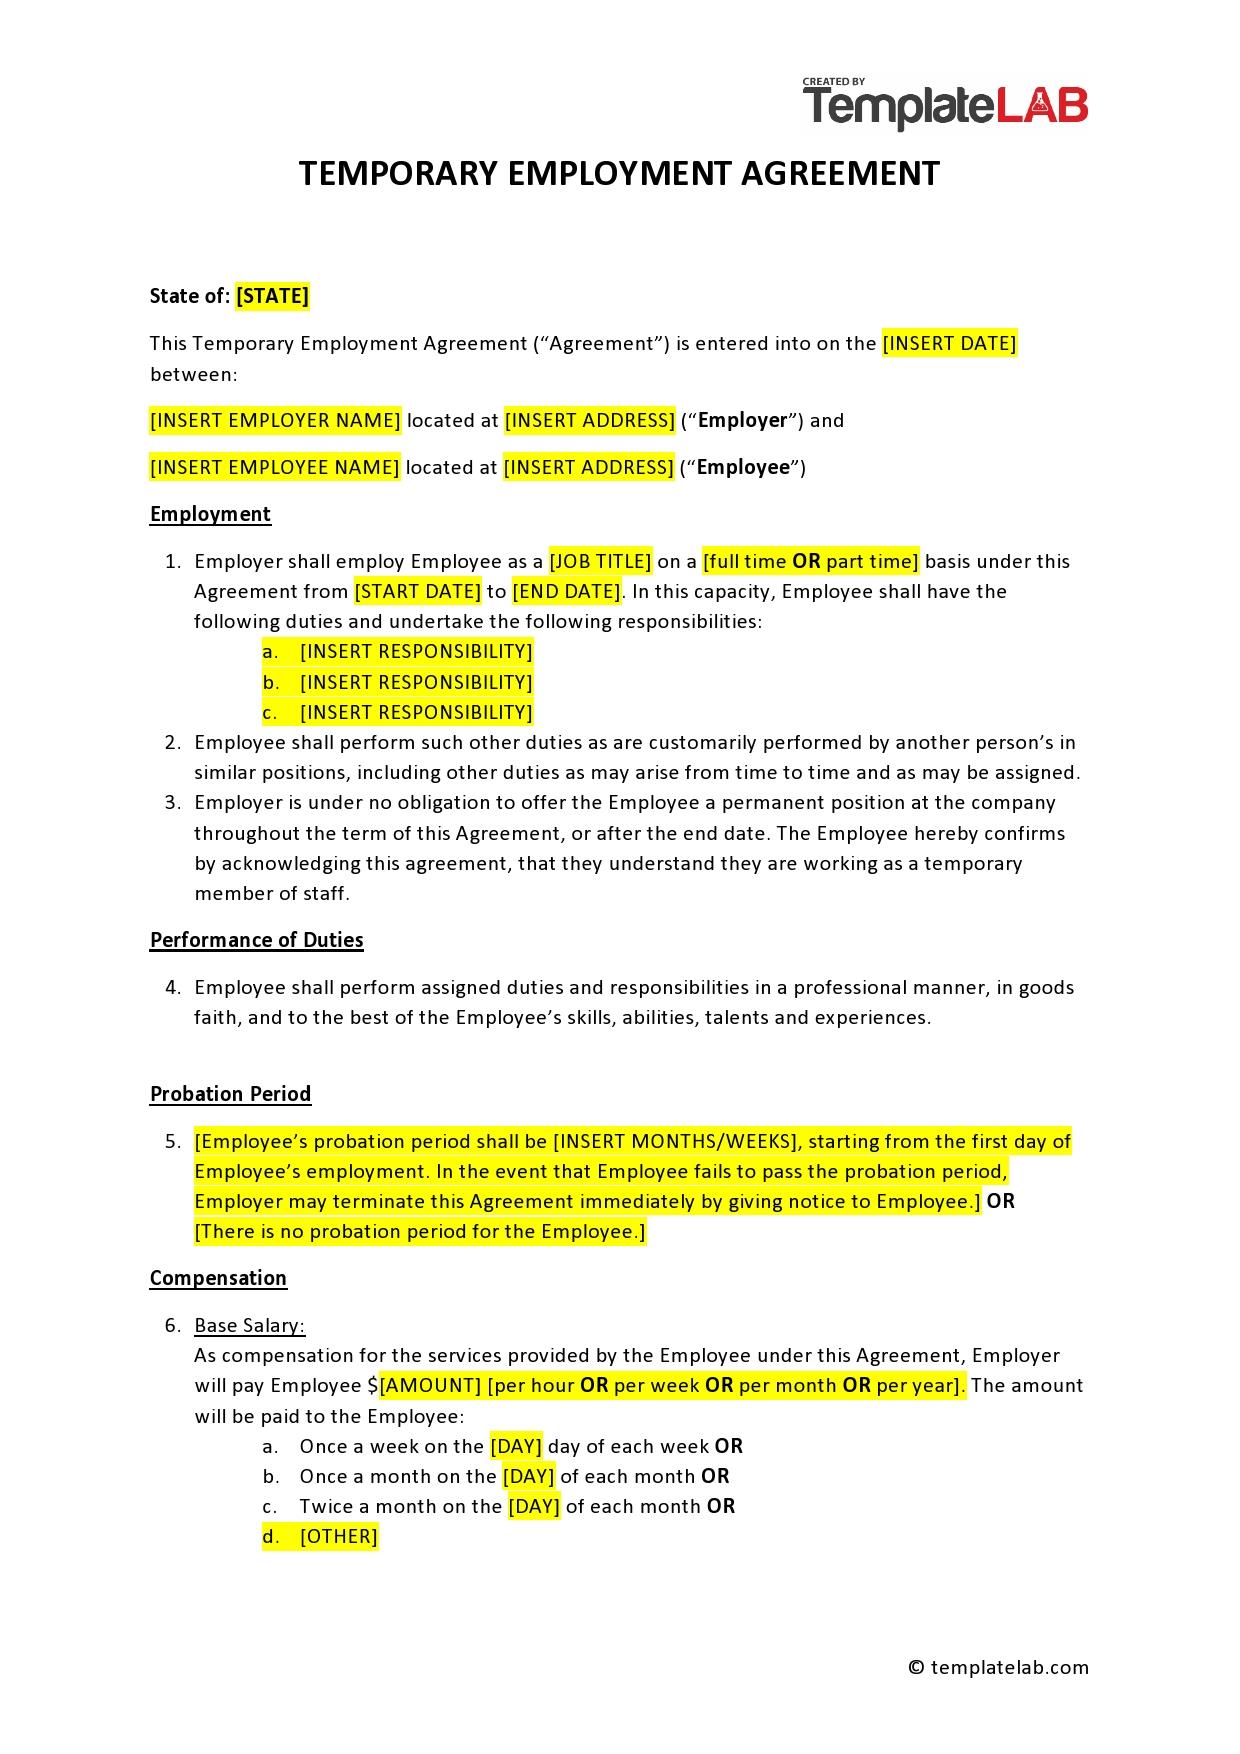 Free Employment Contract Template & FAQs - Rocket Lawyer